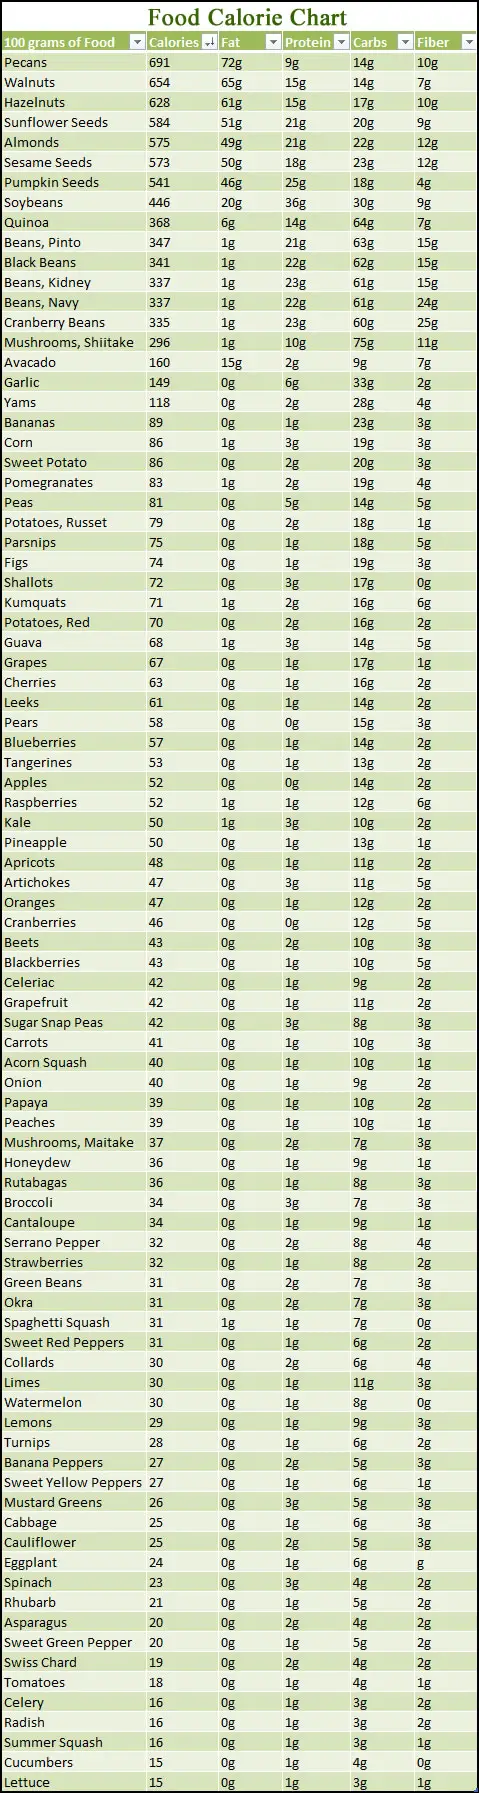 What fruits and vegetables are low in calories?